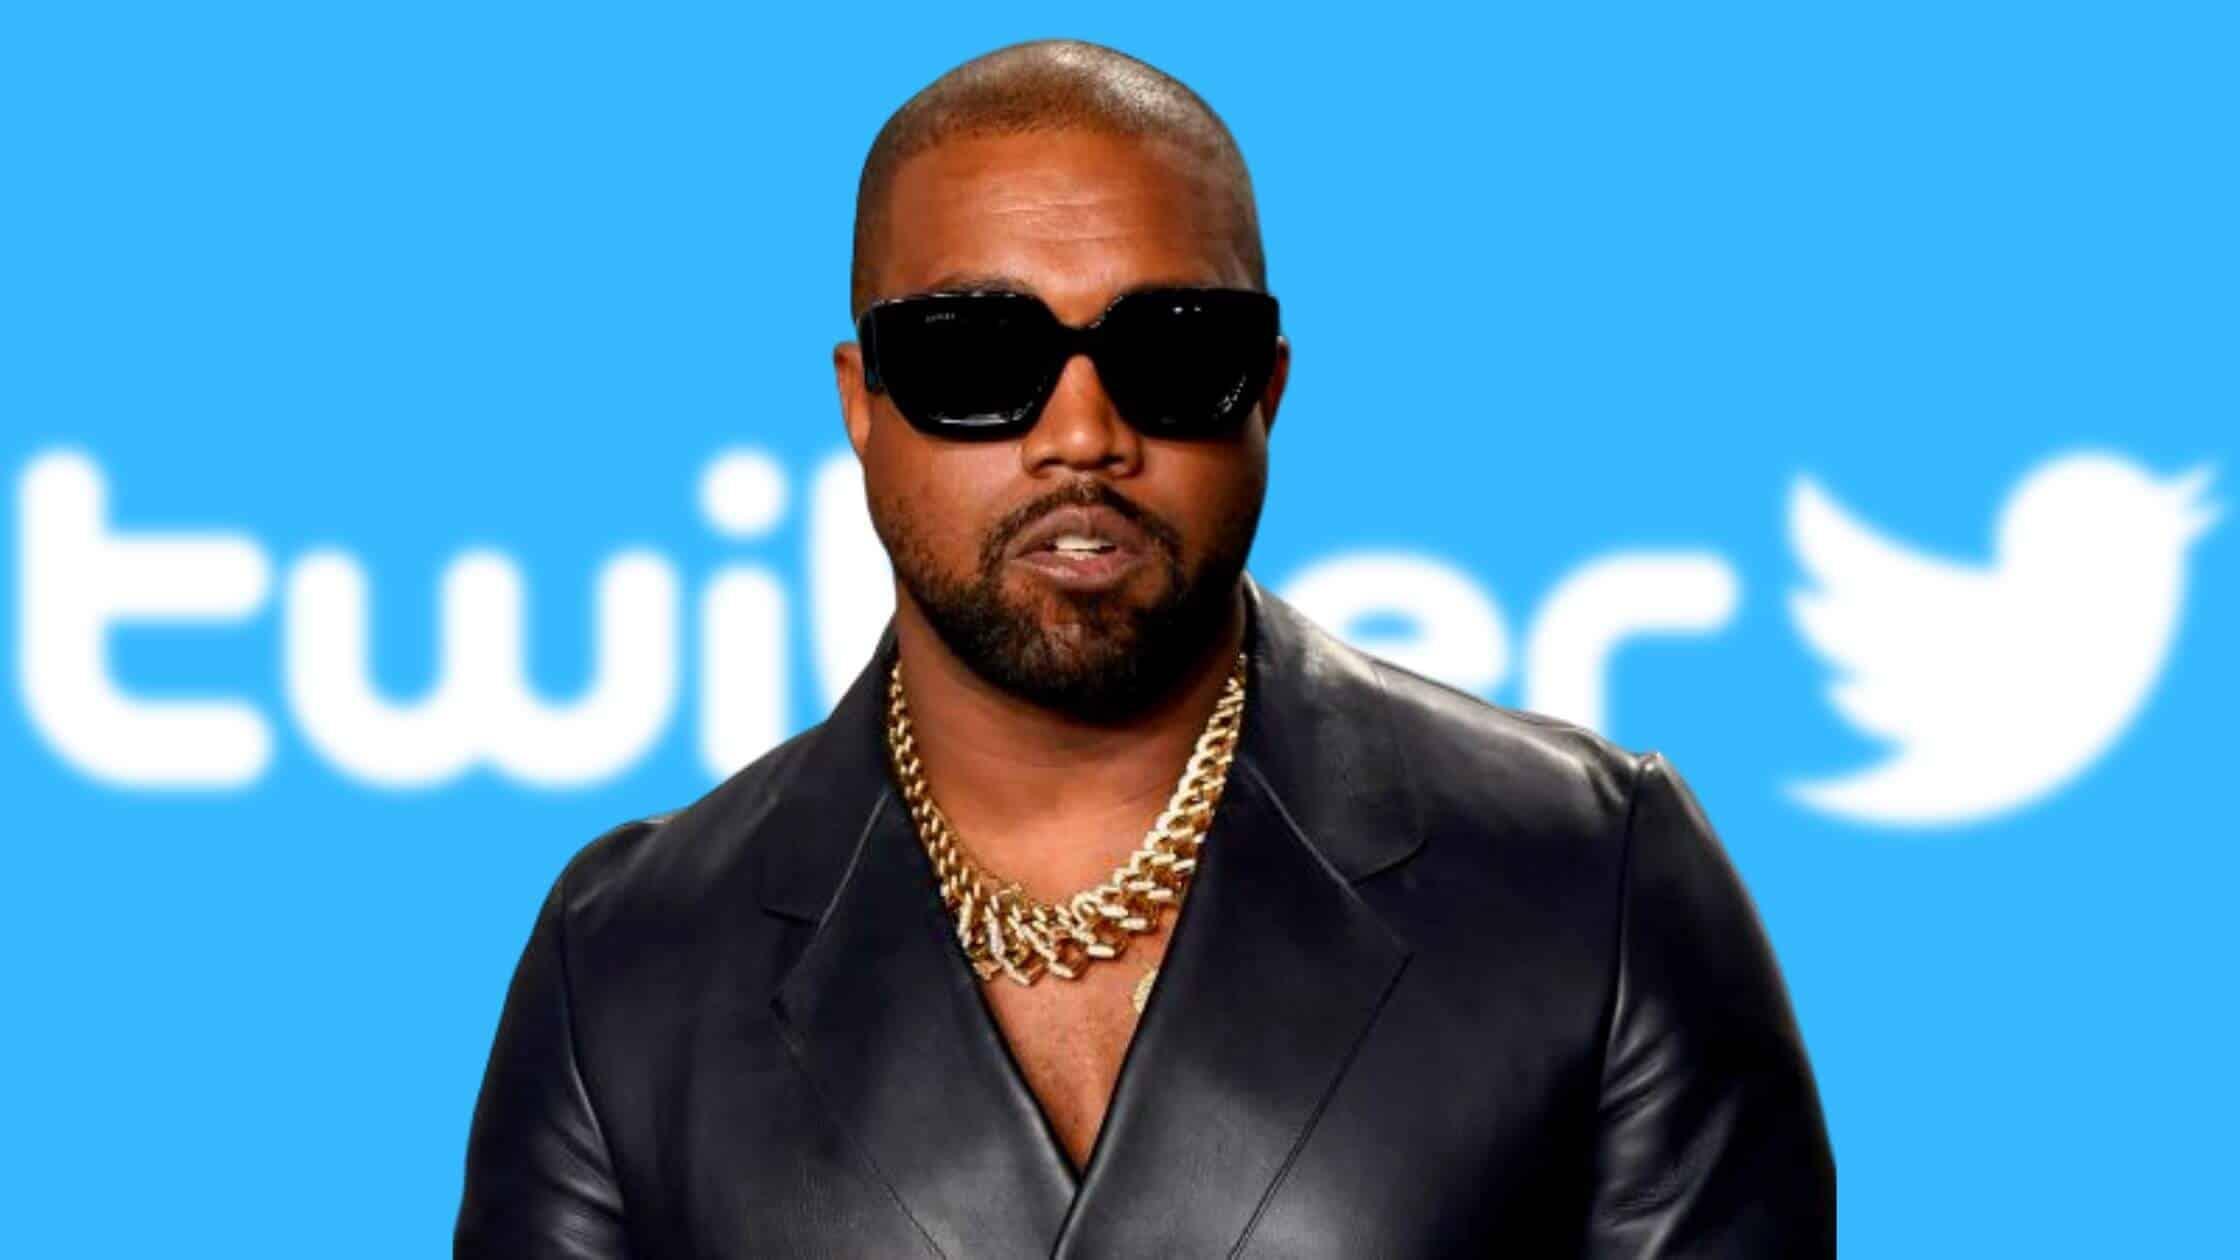 Kanye West's Twitter Account Suspended For Inciting Violence